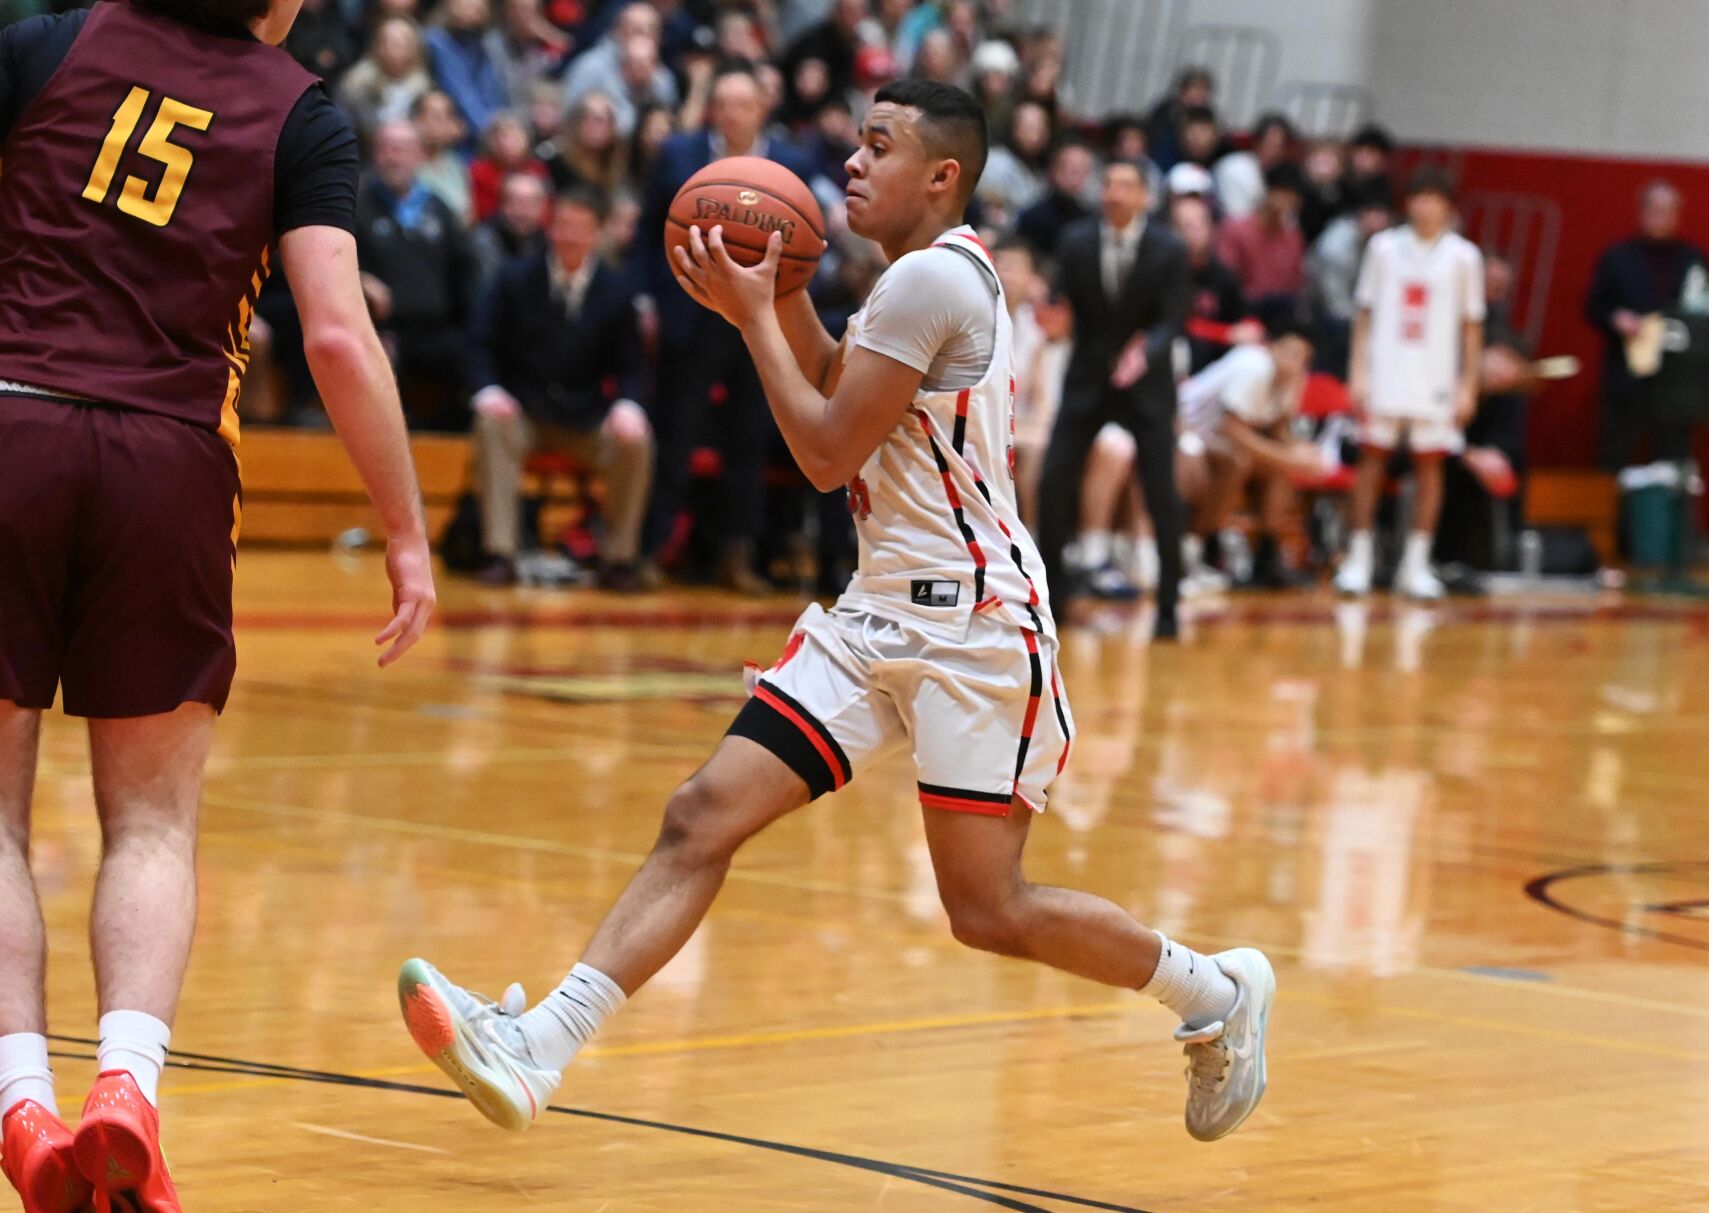 Niskayuna High School’s Basketball Team: A Promising Start Cut Short, Upcoming Exciting Matchups, and Coach Van Hoesen’s Milestone Victory